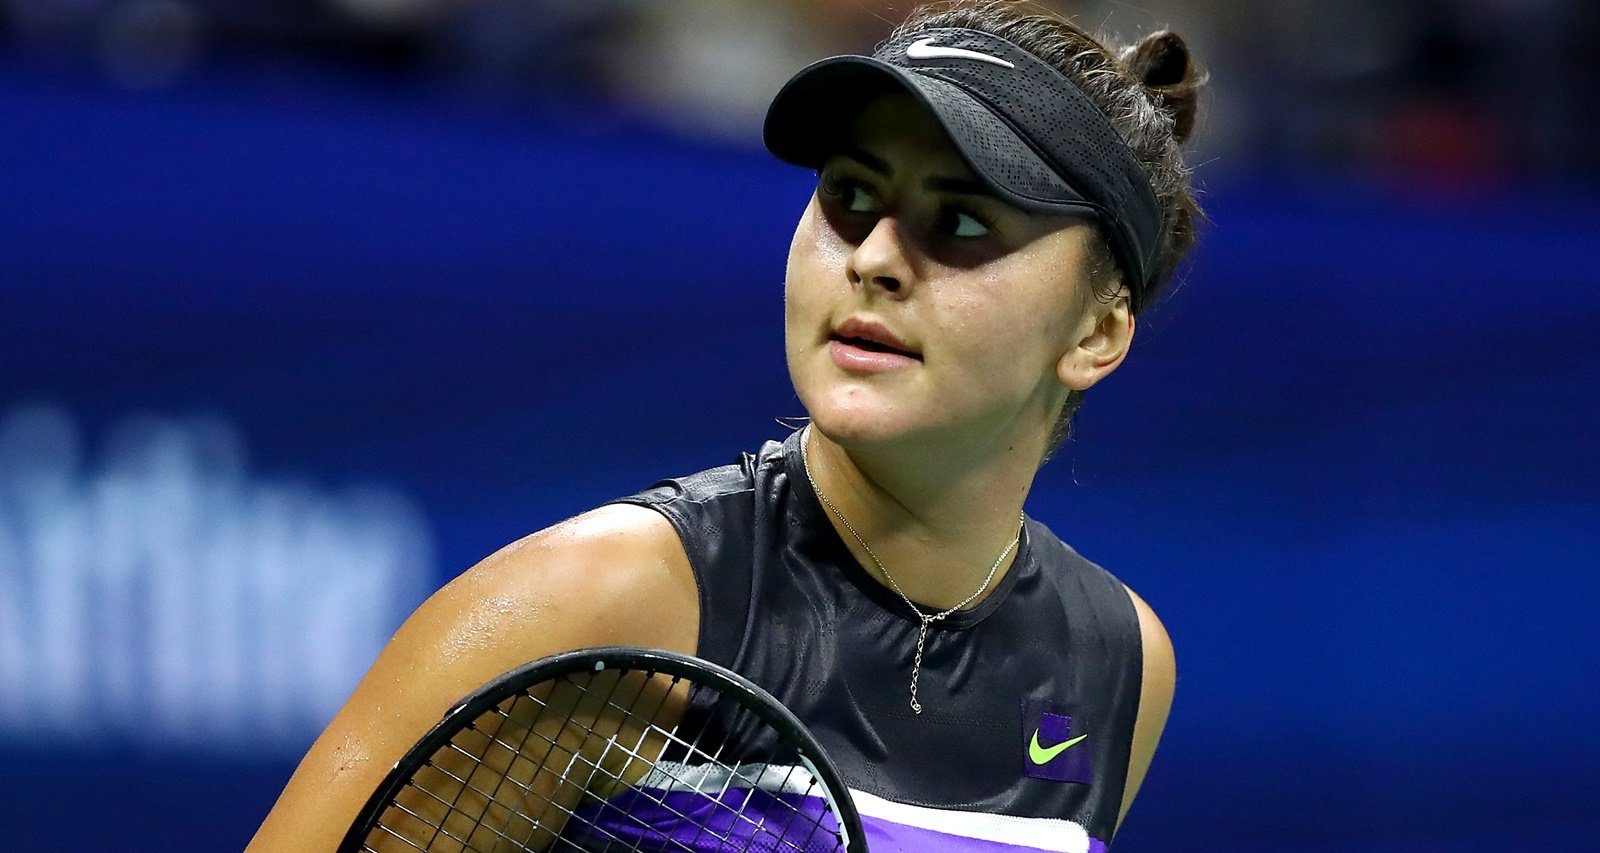 Maria and Nicu Andreescu: Facts About Bianca Andreescu's Parents, Father and Mother